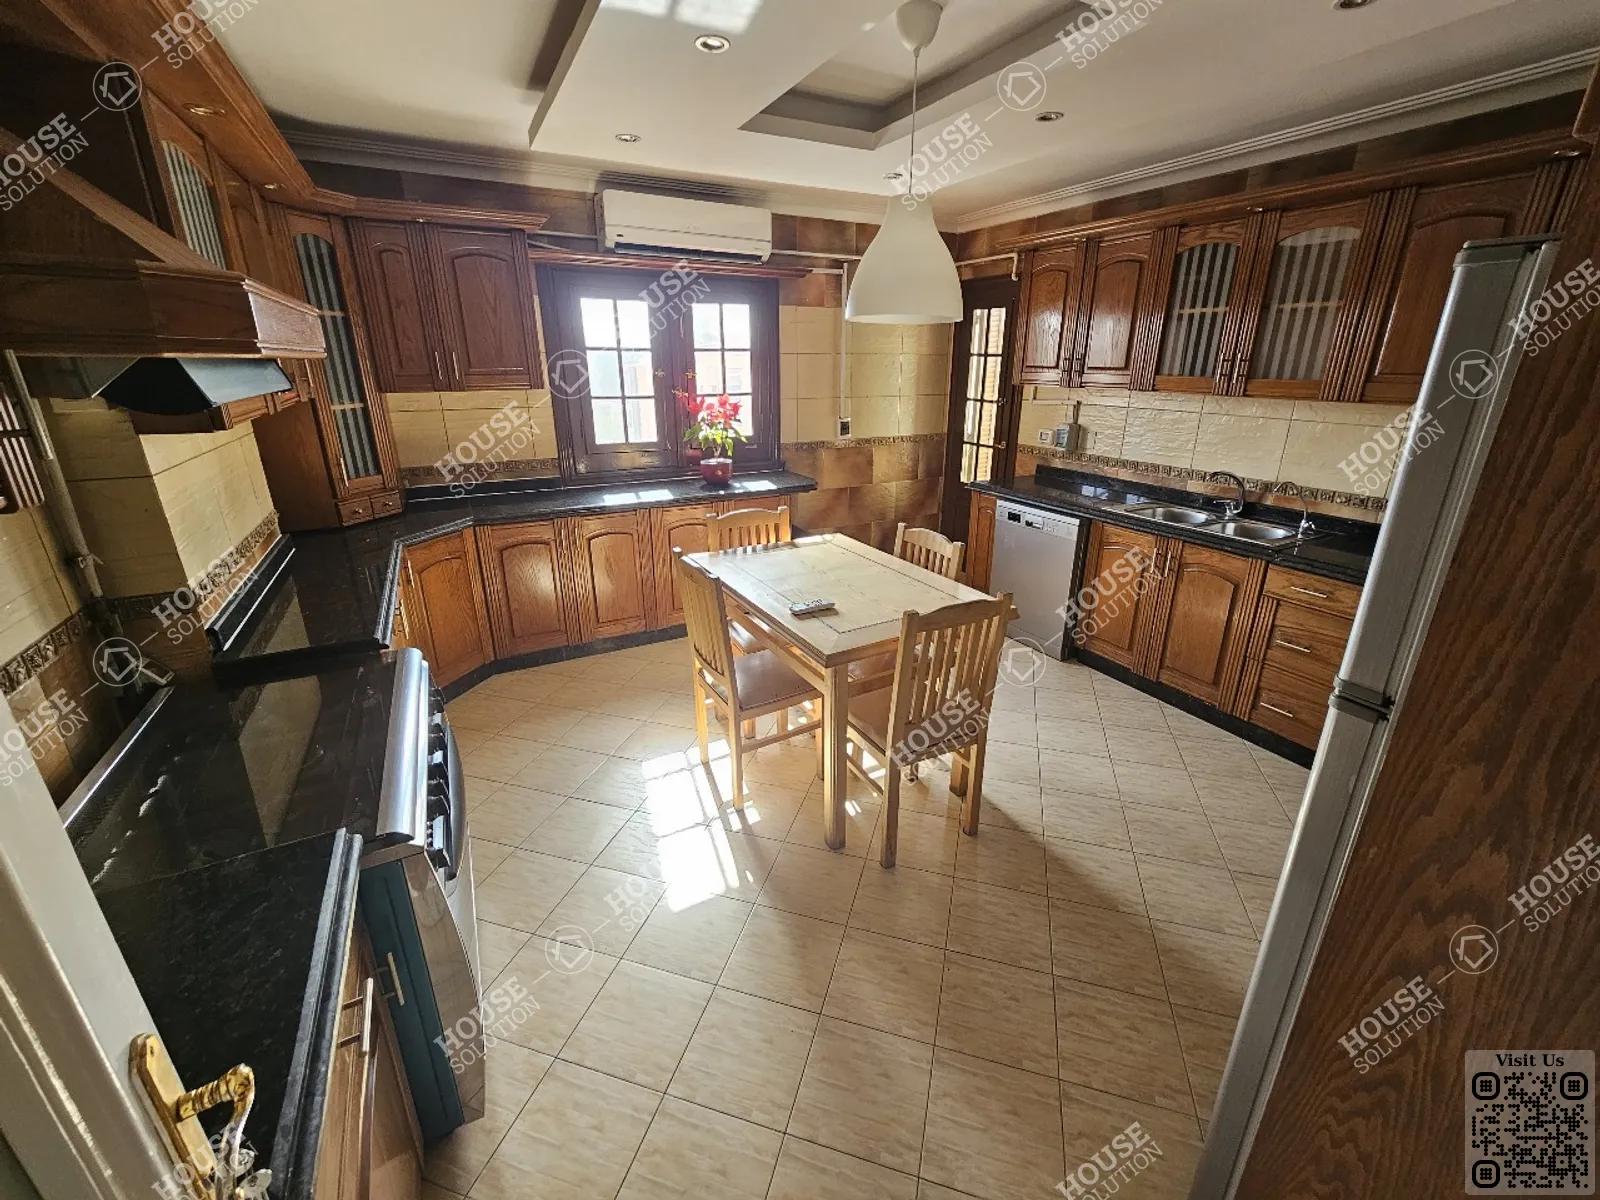 KITCHEN  @ Apartments For Rent In Maadi Maadi Sarayat Area: 320 m² consists of 4 Bedrooms 4 Bathrooms Modern furnished 5 stars #5796-1